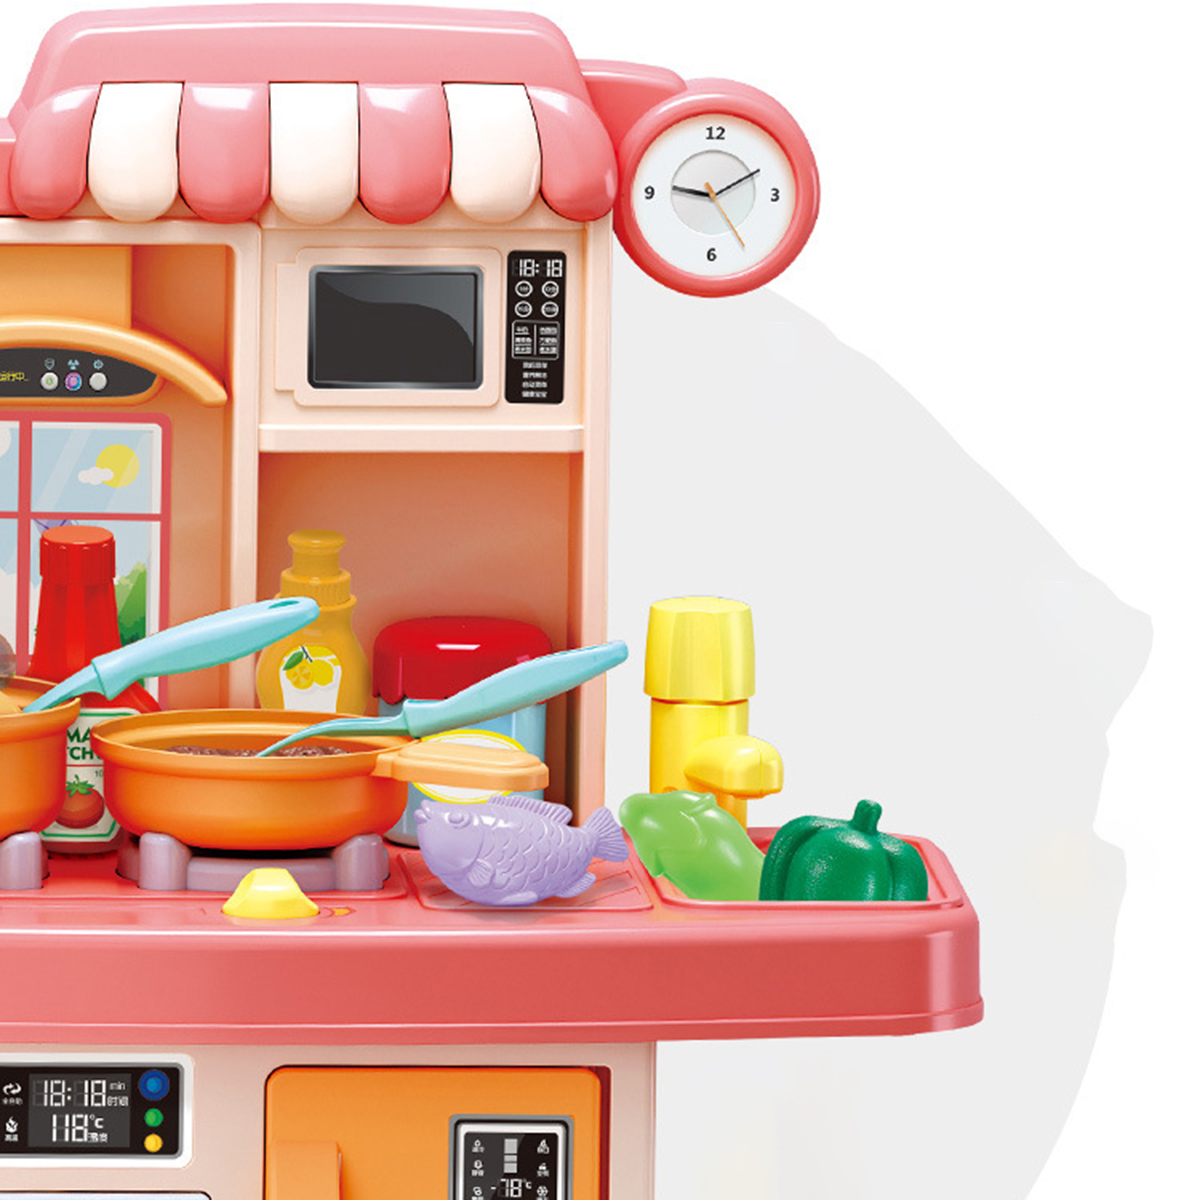 Kitchen Playset Play For Kids Pretend Play Toy Toddler Kitchenware Cooking Sets 